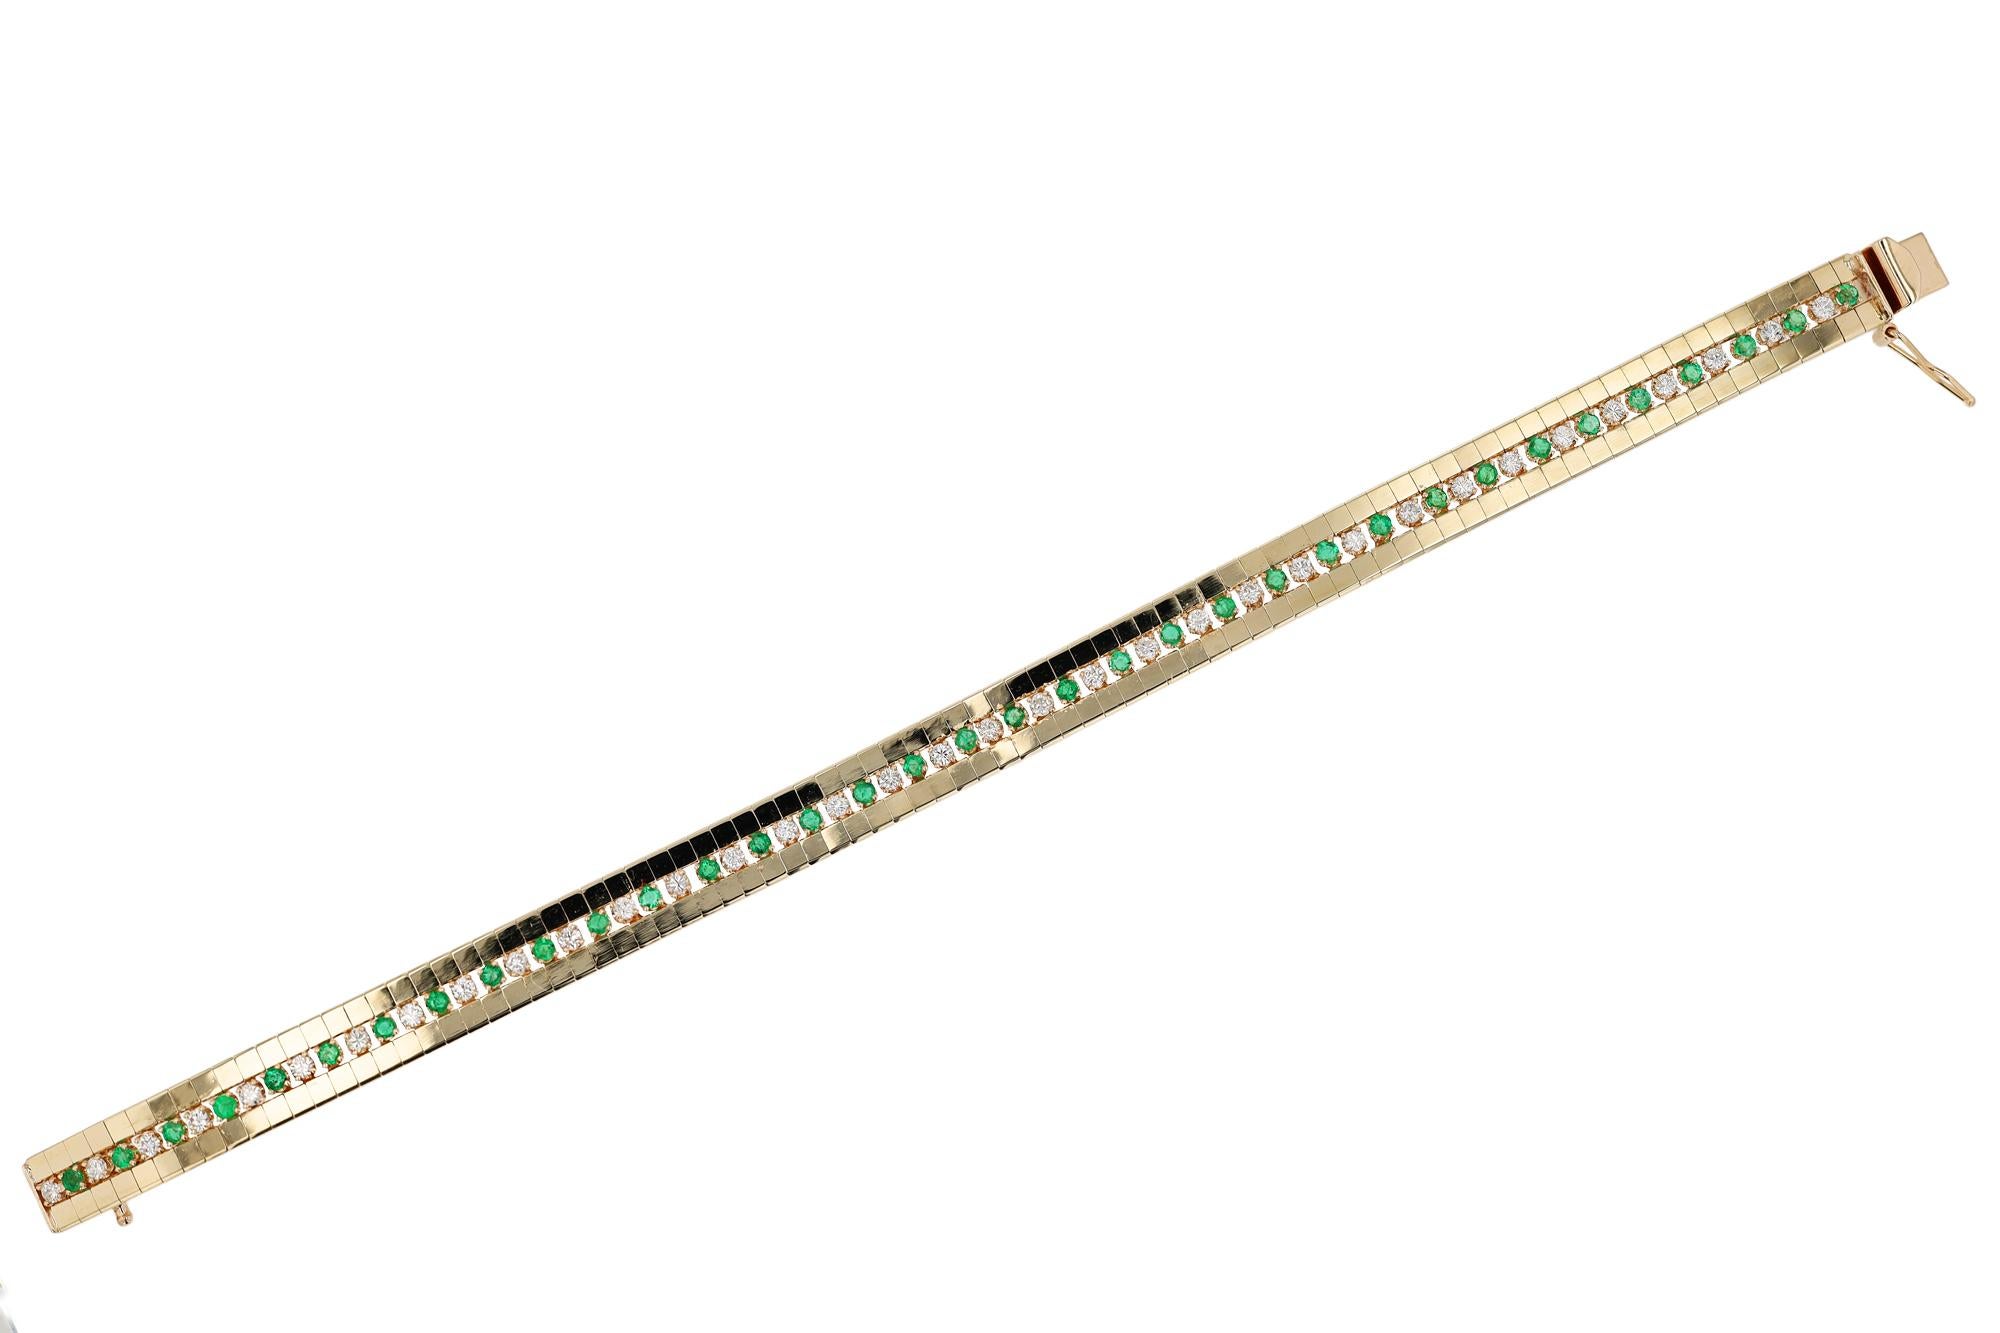 A vintage 1970s beauty! Set with bright and vibrant emeralds alternating with near-colorless diamonds in a straight line motif. Bordering the gemstones are gleaming, polished rows of buttery 14k yellow gold stations that elevate the look. Add a